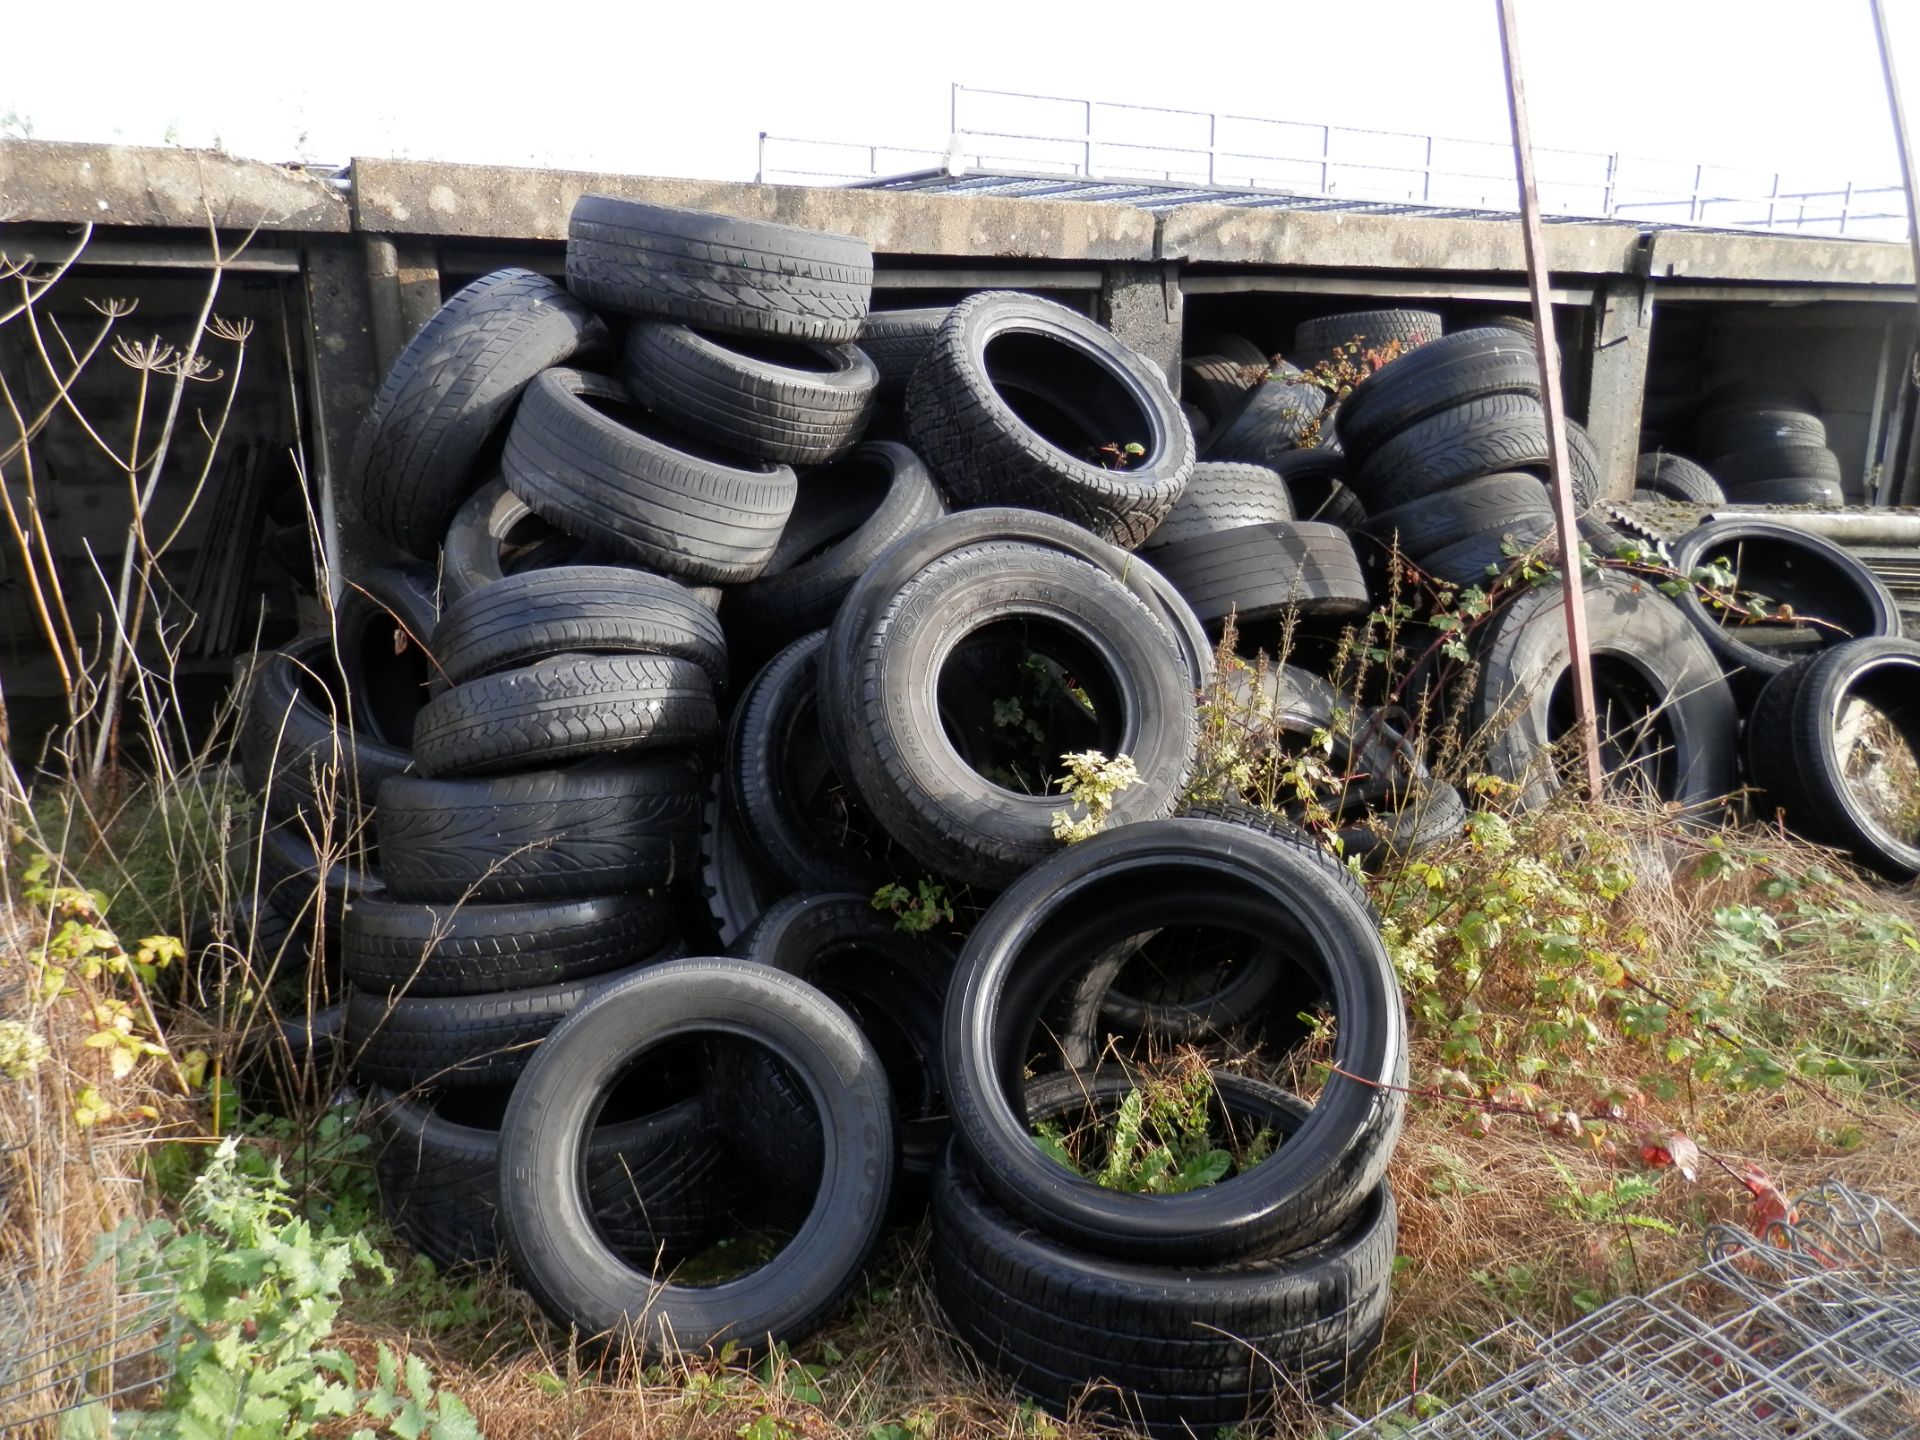 3 CAR GARAGES FULL OF USED, PART WORN TYRES. ASSORTED FROM CAR TO LORRY TYRES. POSSIBLY 800+ £10 !!